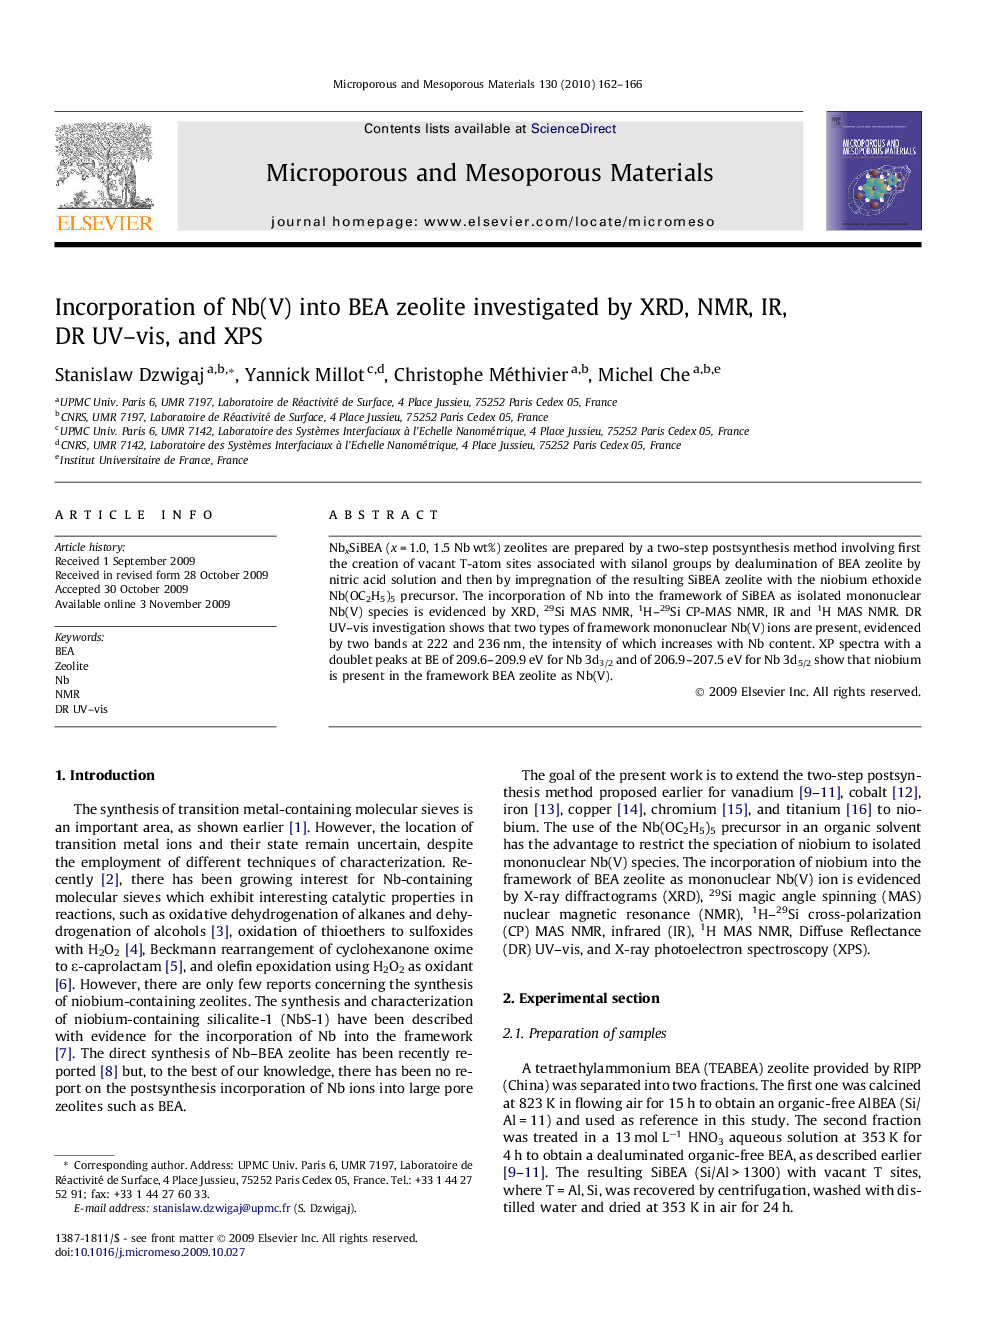 Incorporation of Nb(V) into BEA zeolite investigated by XRD, NMR, IR, DR UV–vis, and XPS